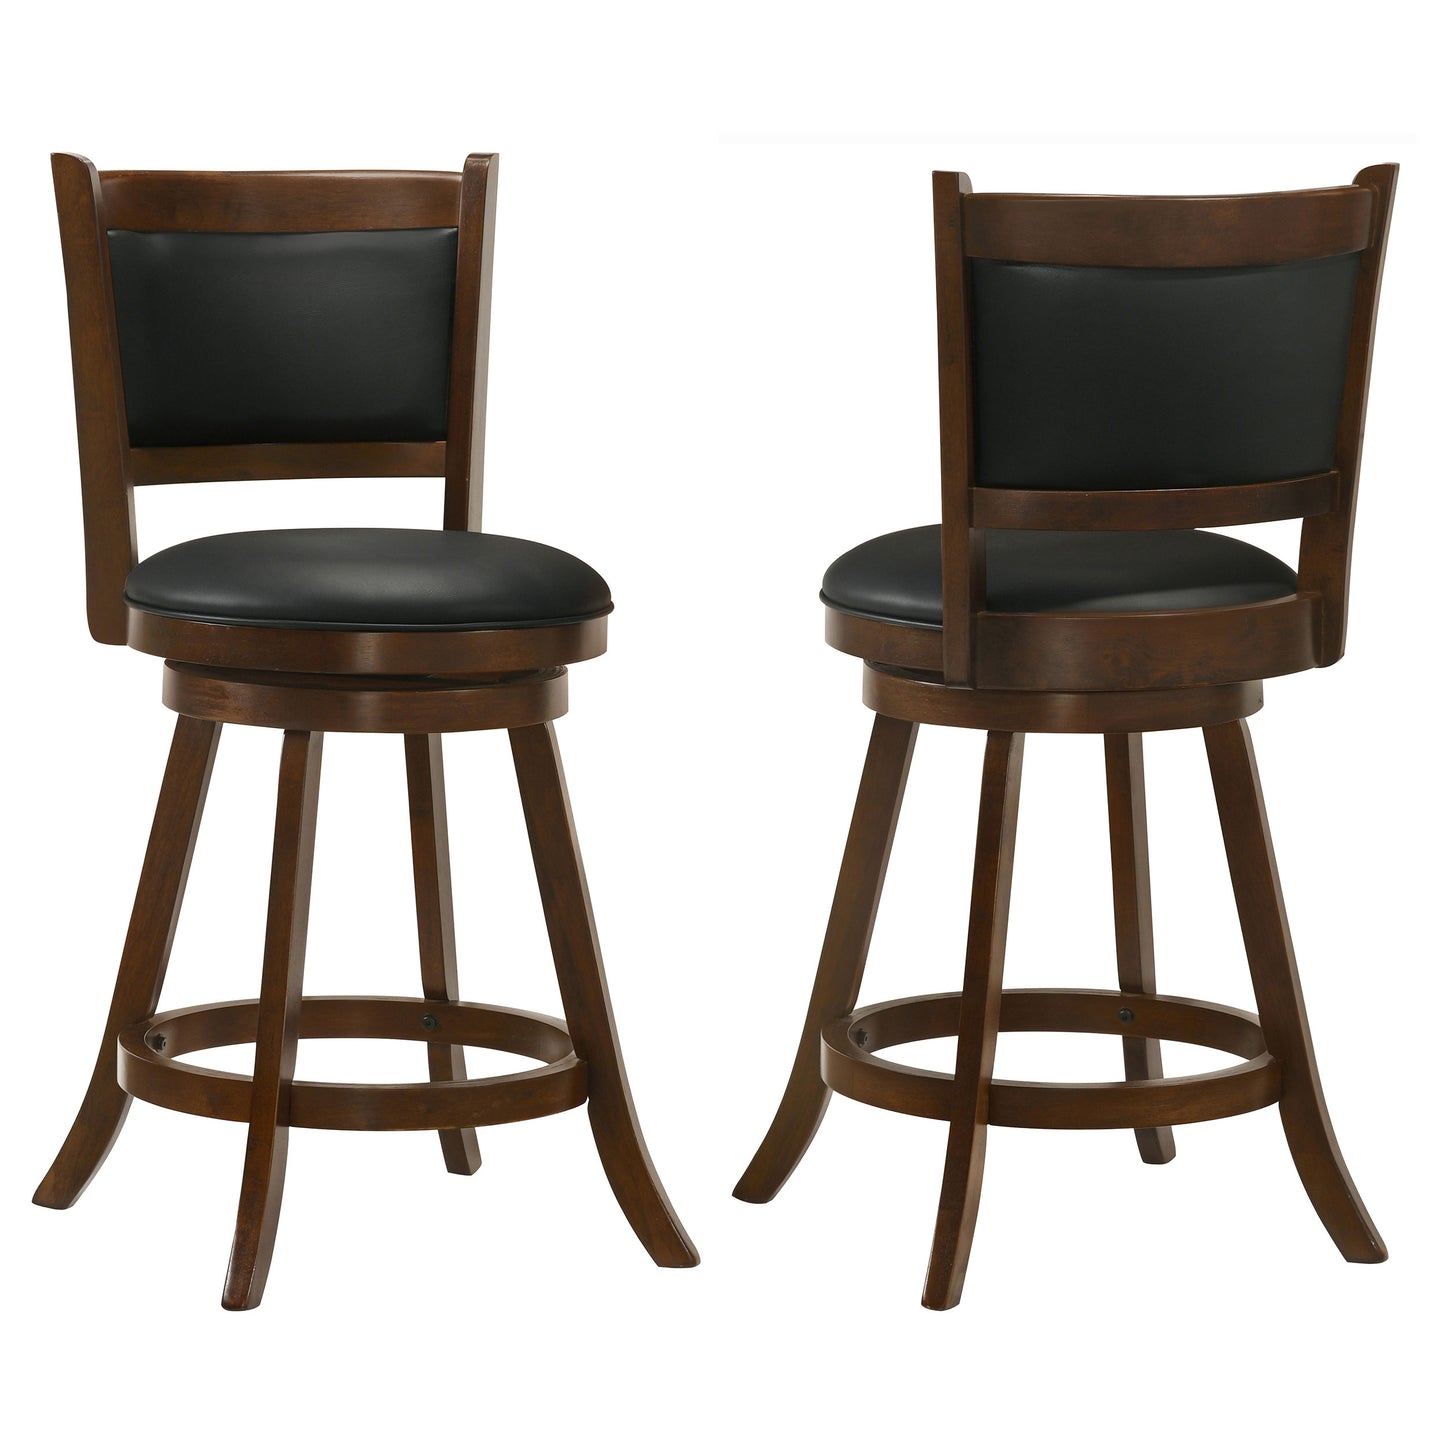 Broxton Upholstered Swivel Counter Height Stools Chestnut and Black (Set of 2)